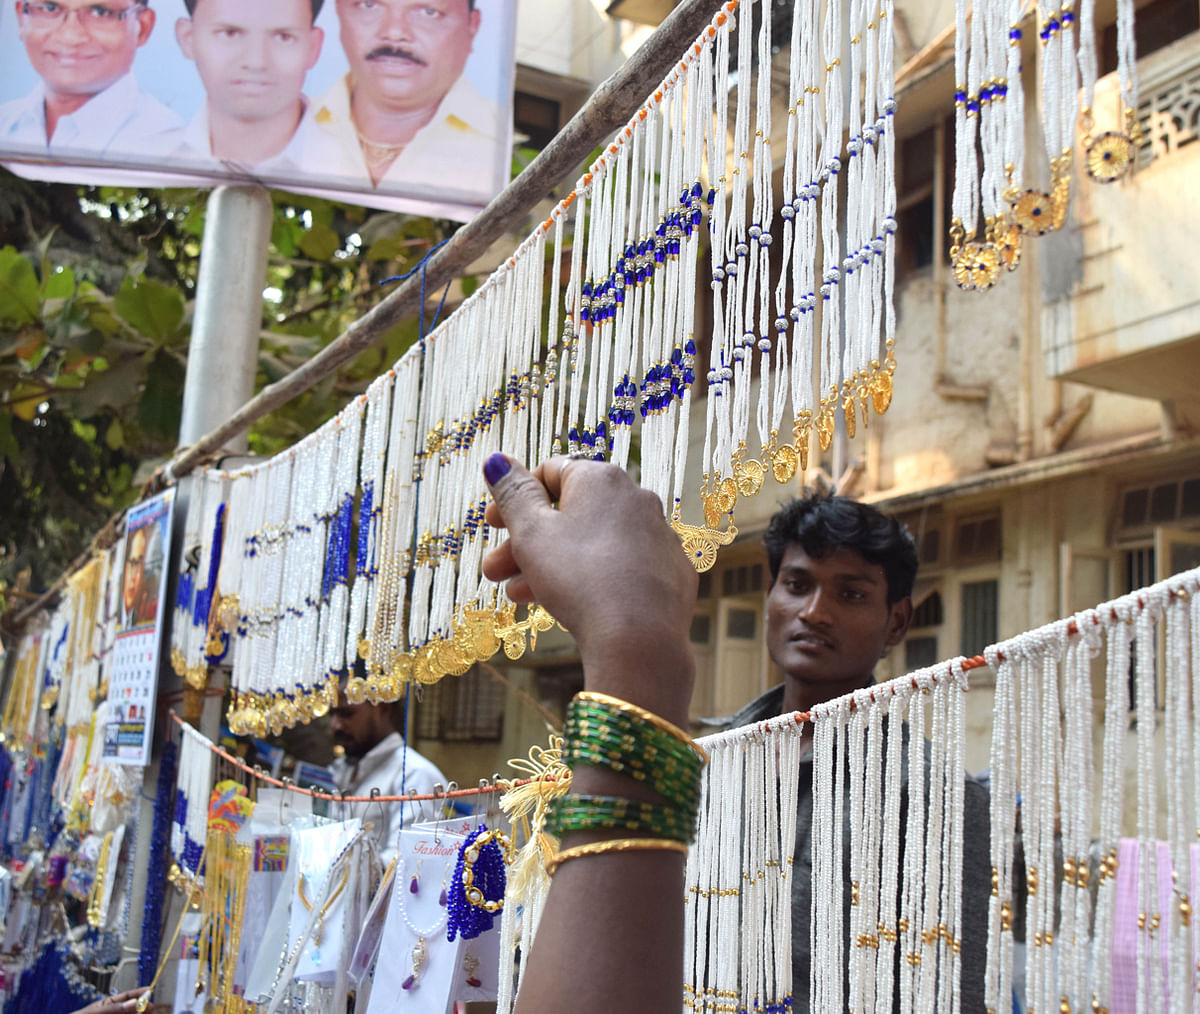 Glimpses & stories from amongst the lakhs of people who have flocked to Chaitya Bhoomi, Babasaheb’s memorial spot.